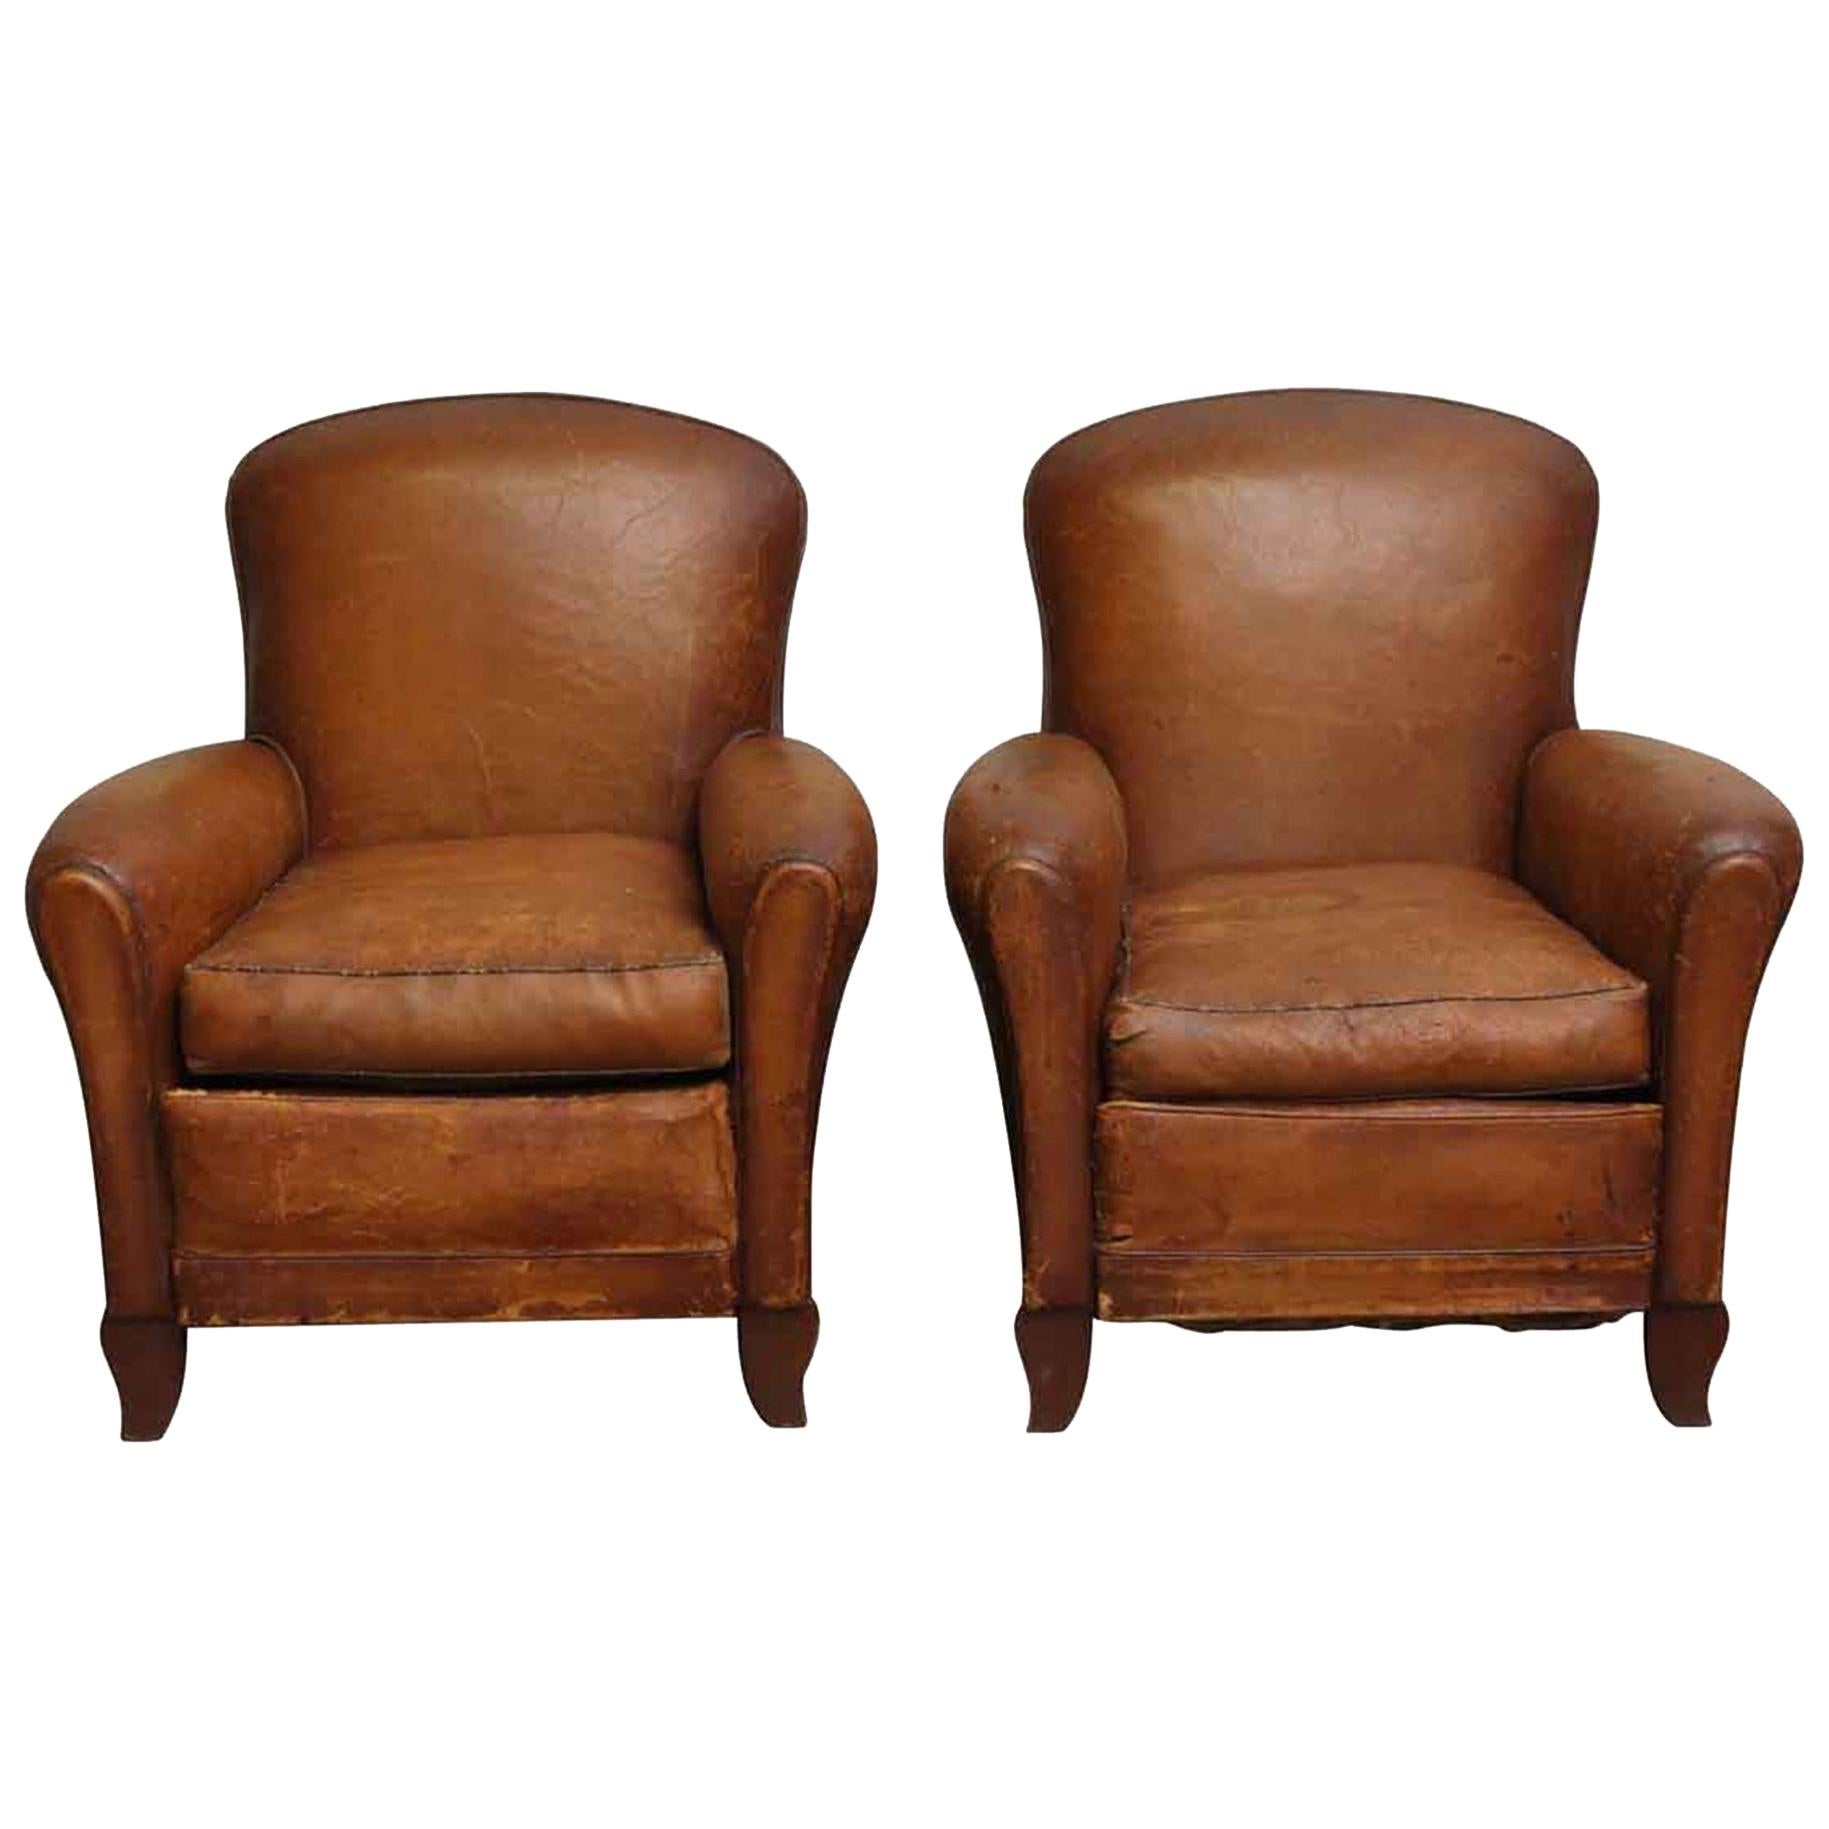 1970s French Pair of Leather Club Chairs with a Studded Back